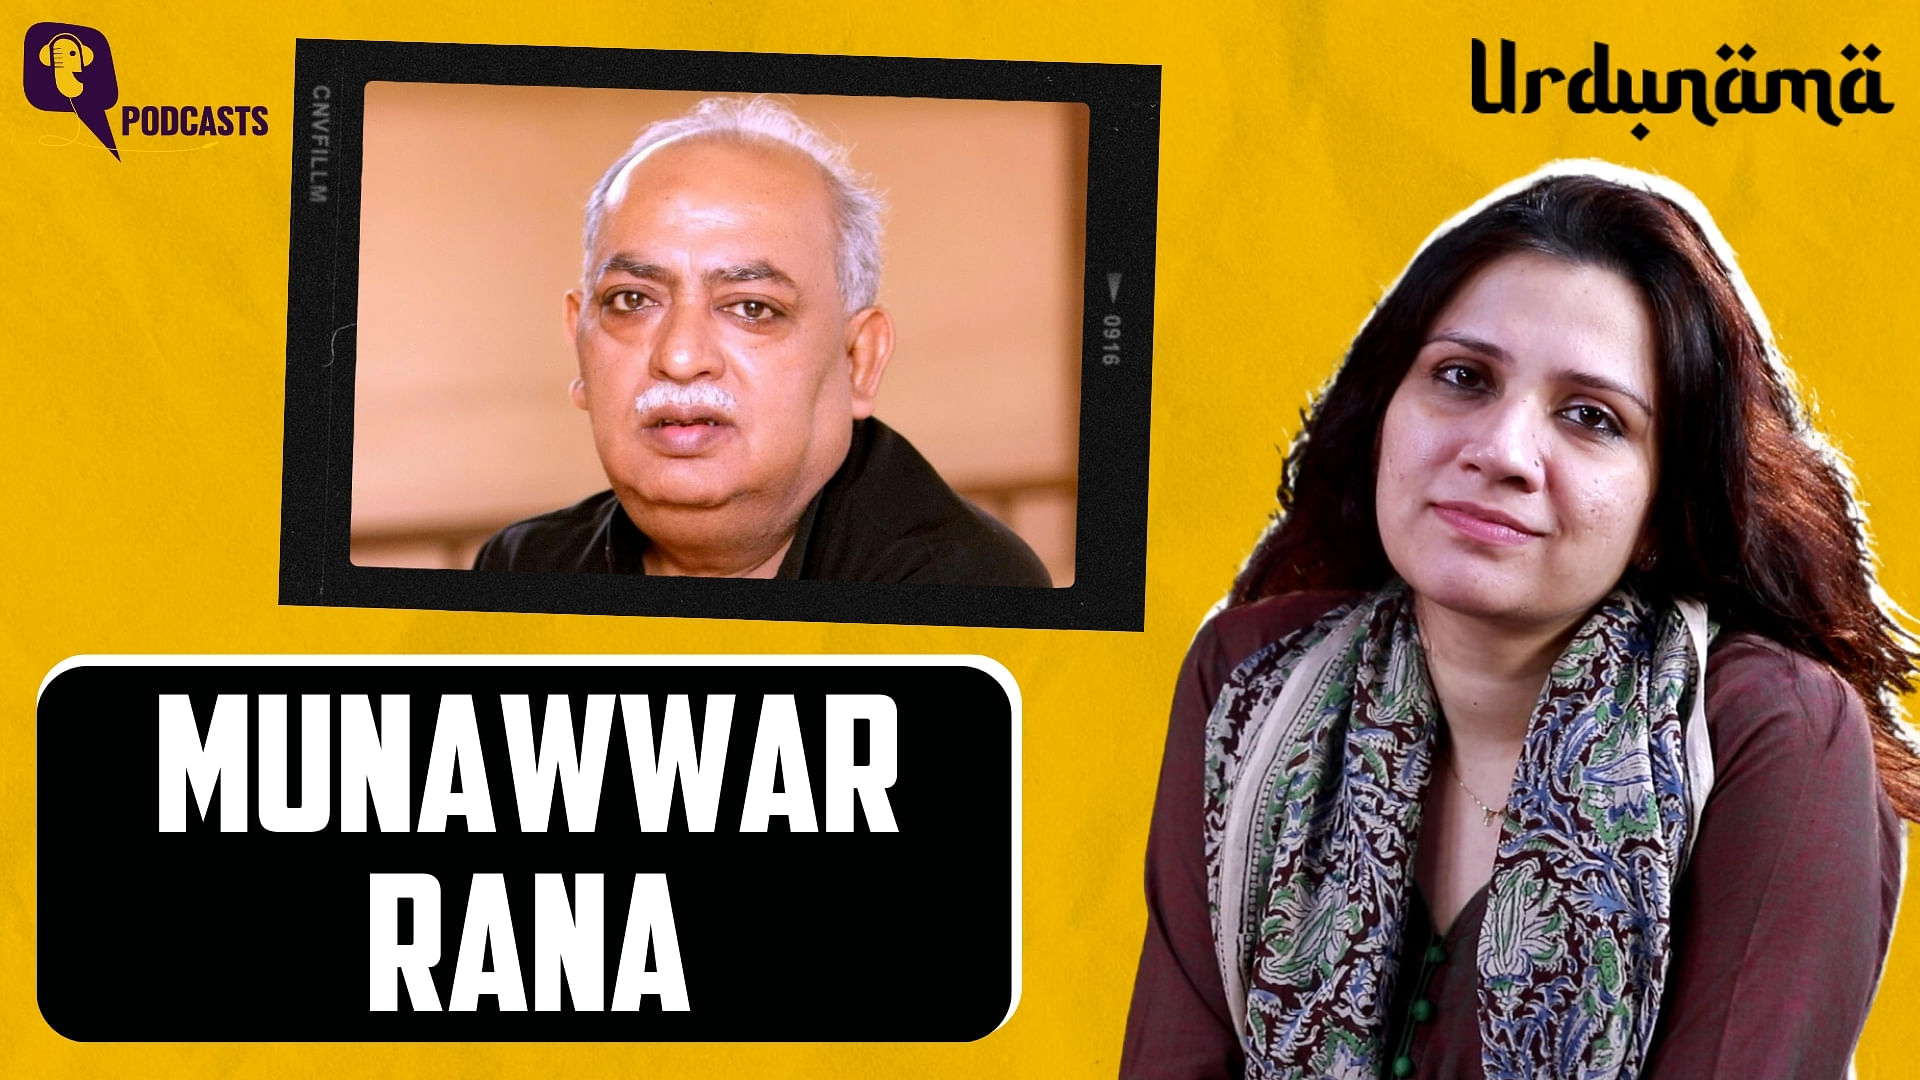 <div class="paragraphs"><p>In this Urdunama episode, Fabeha gives a tribute to Munawwar Rana.</p></div>